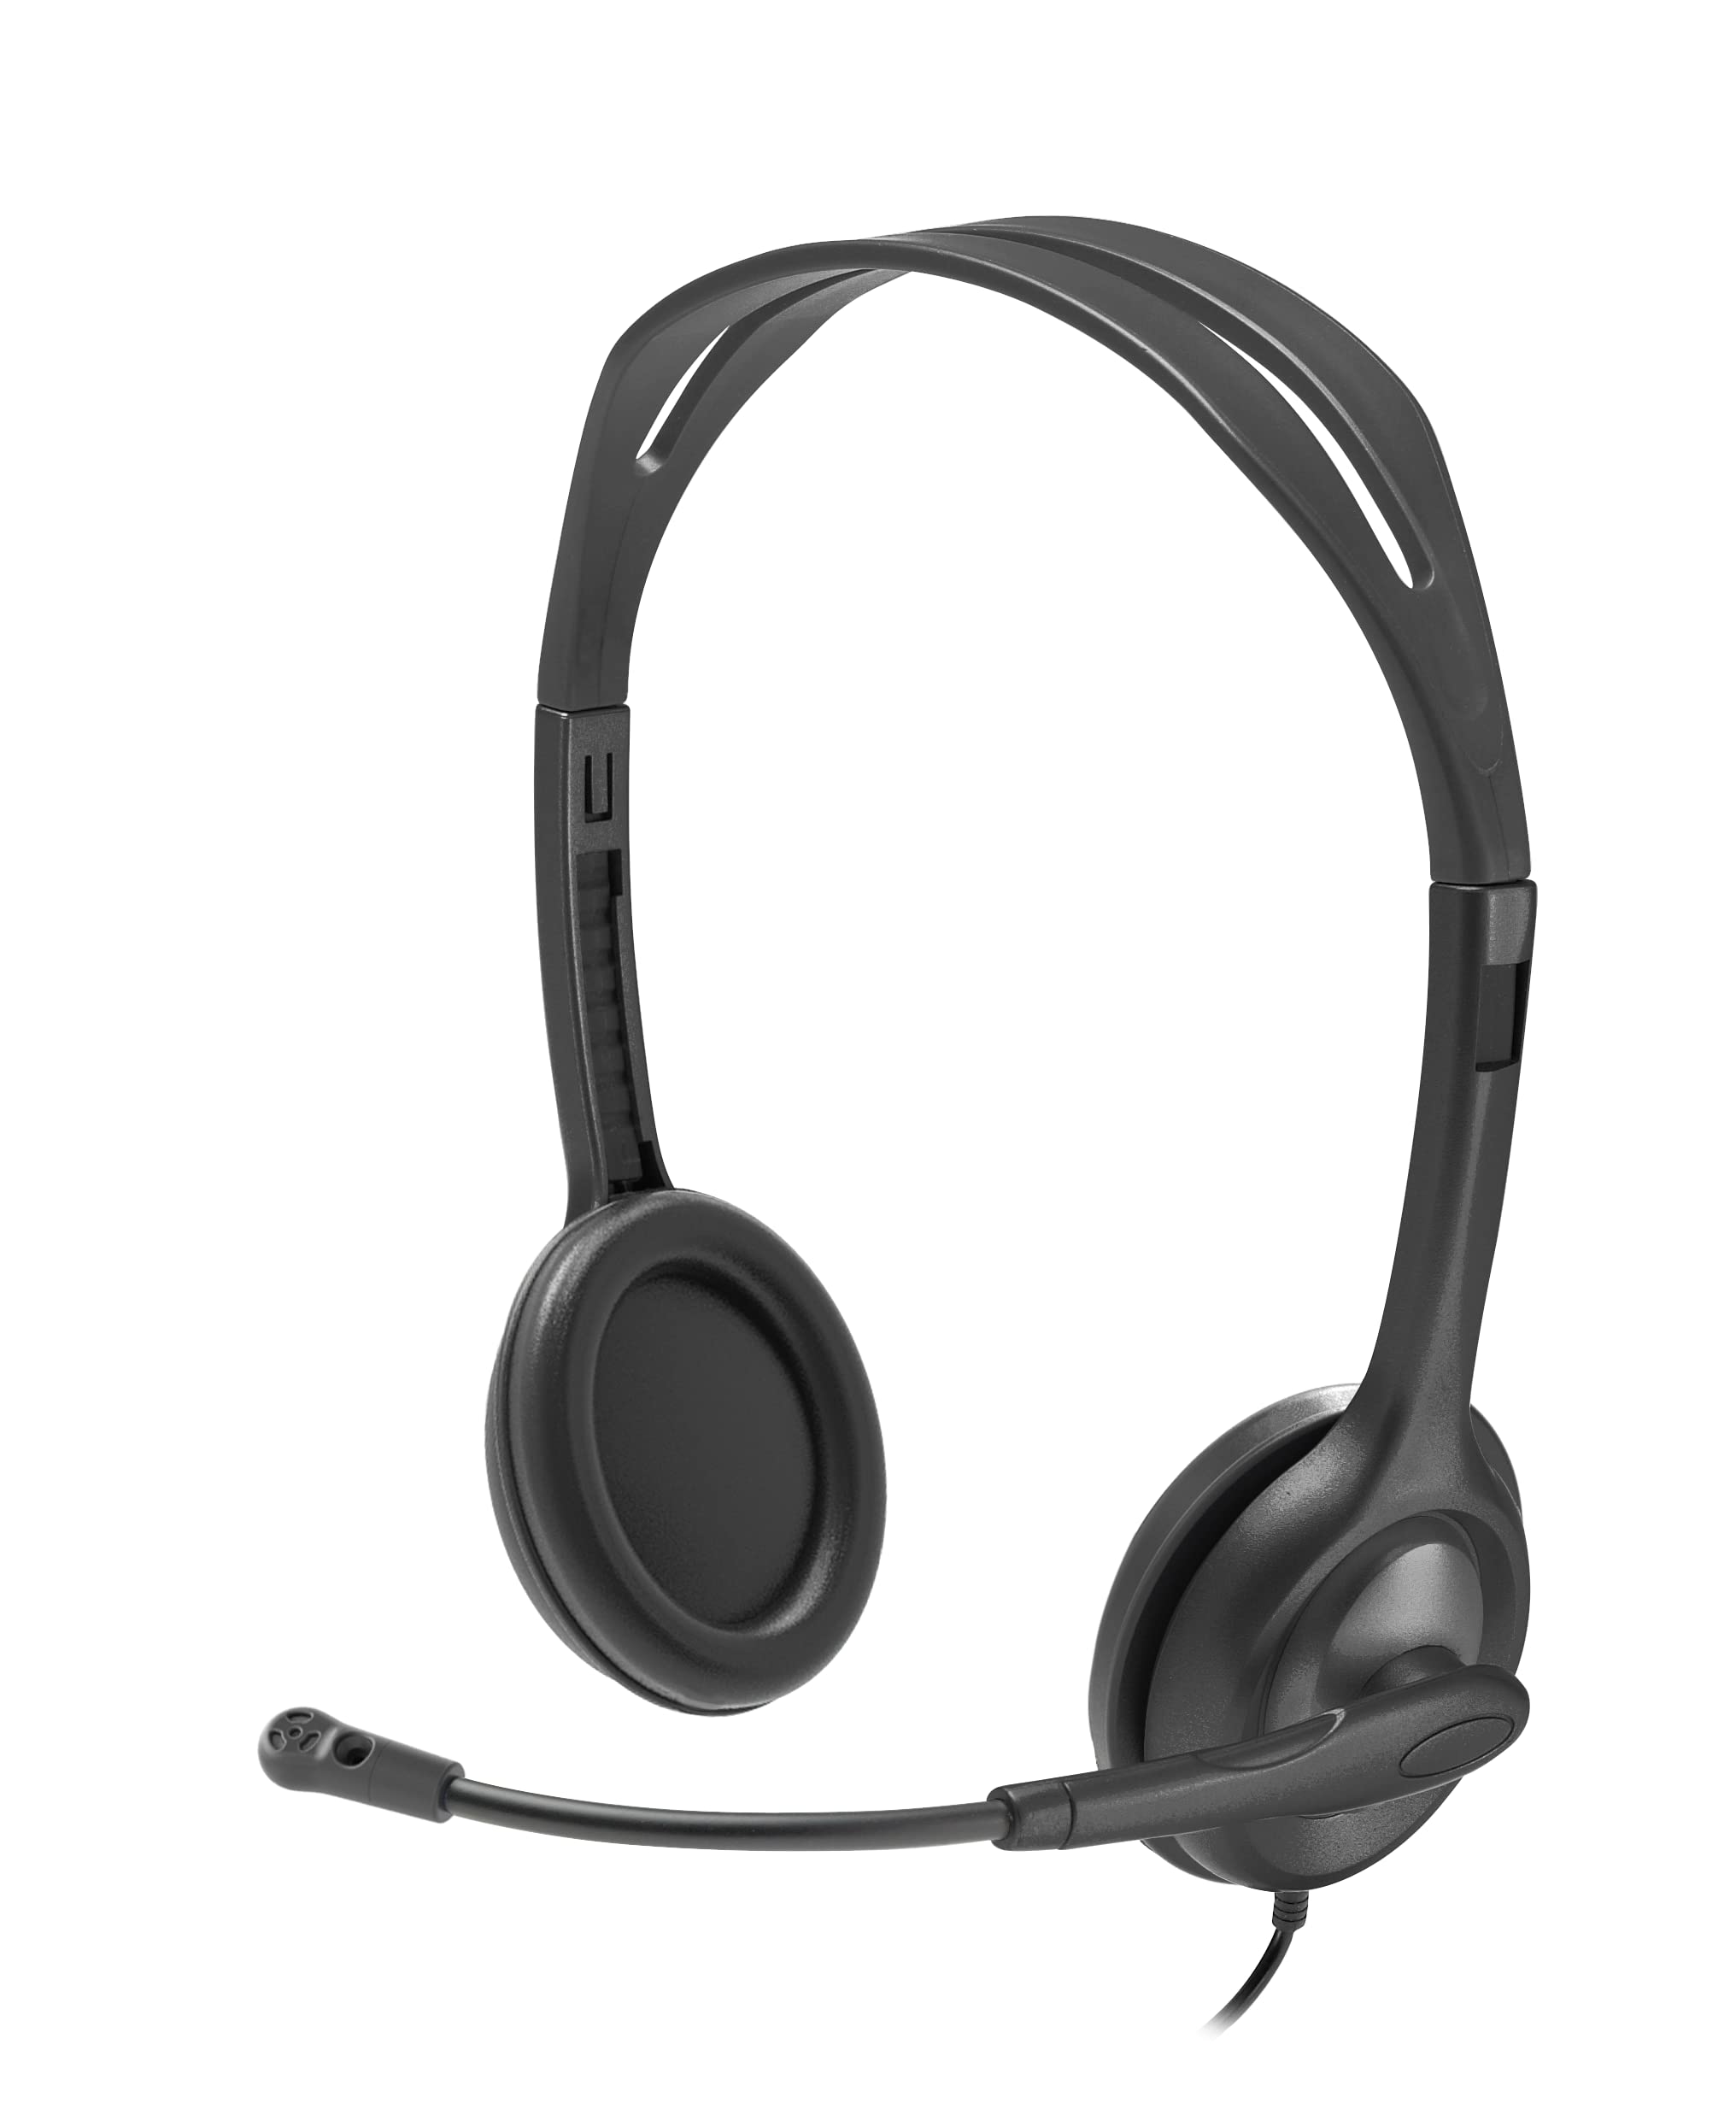 Logitech H111 Stereo Headset with 3.5 mm Audio Jack $10.96 Amazon